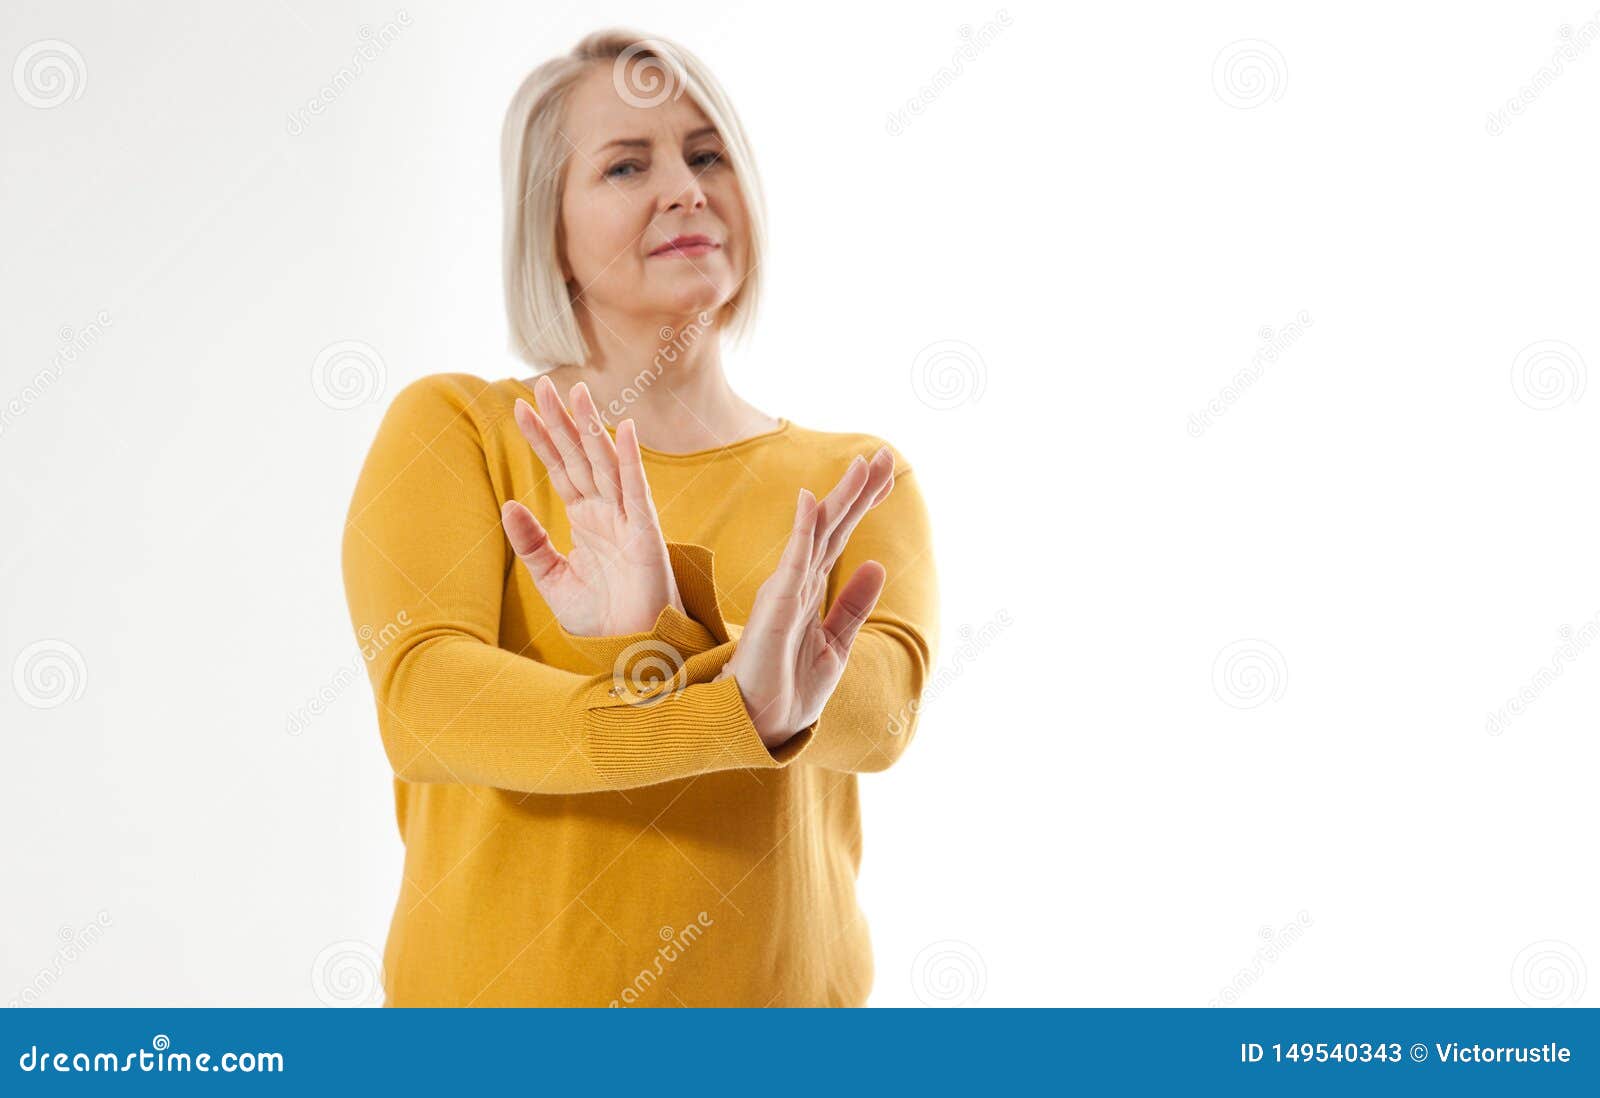 excited woman showing the sign of stop, neglect, negation and reluctance